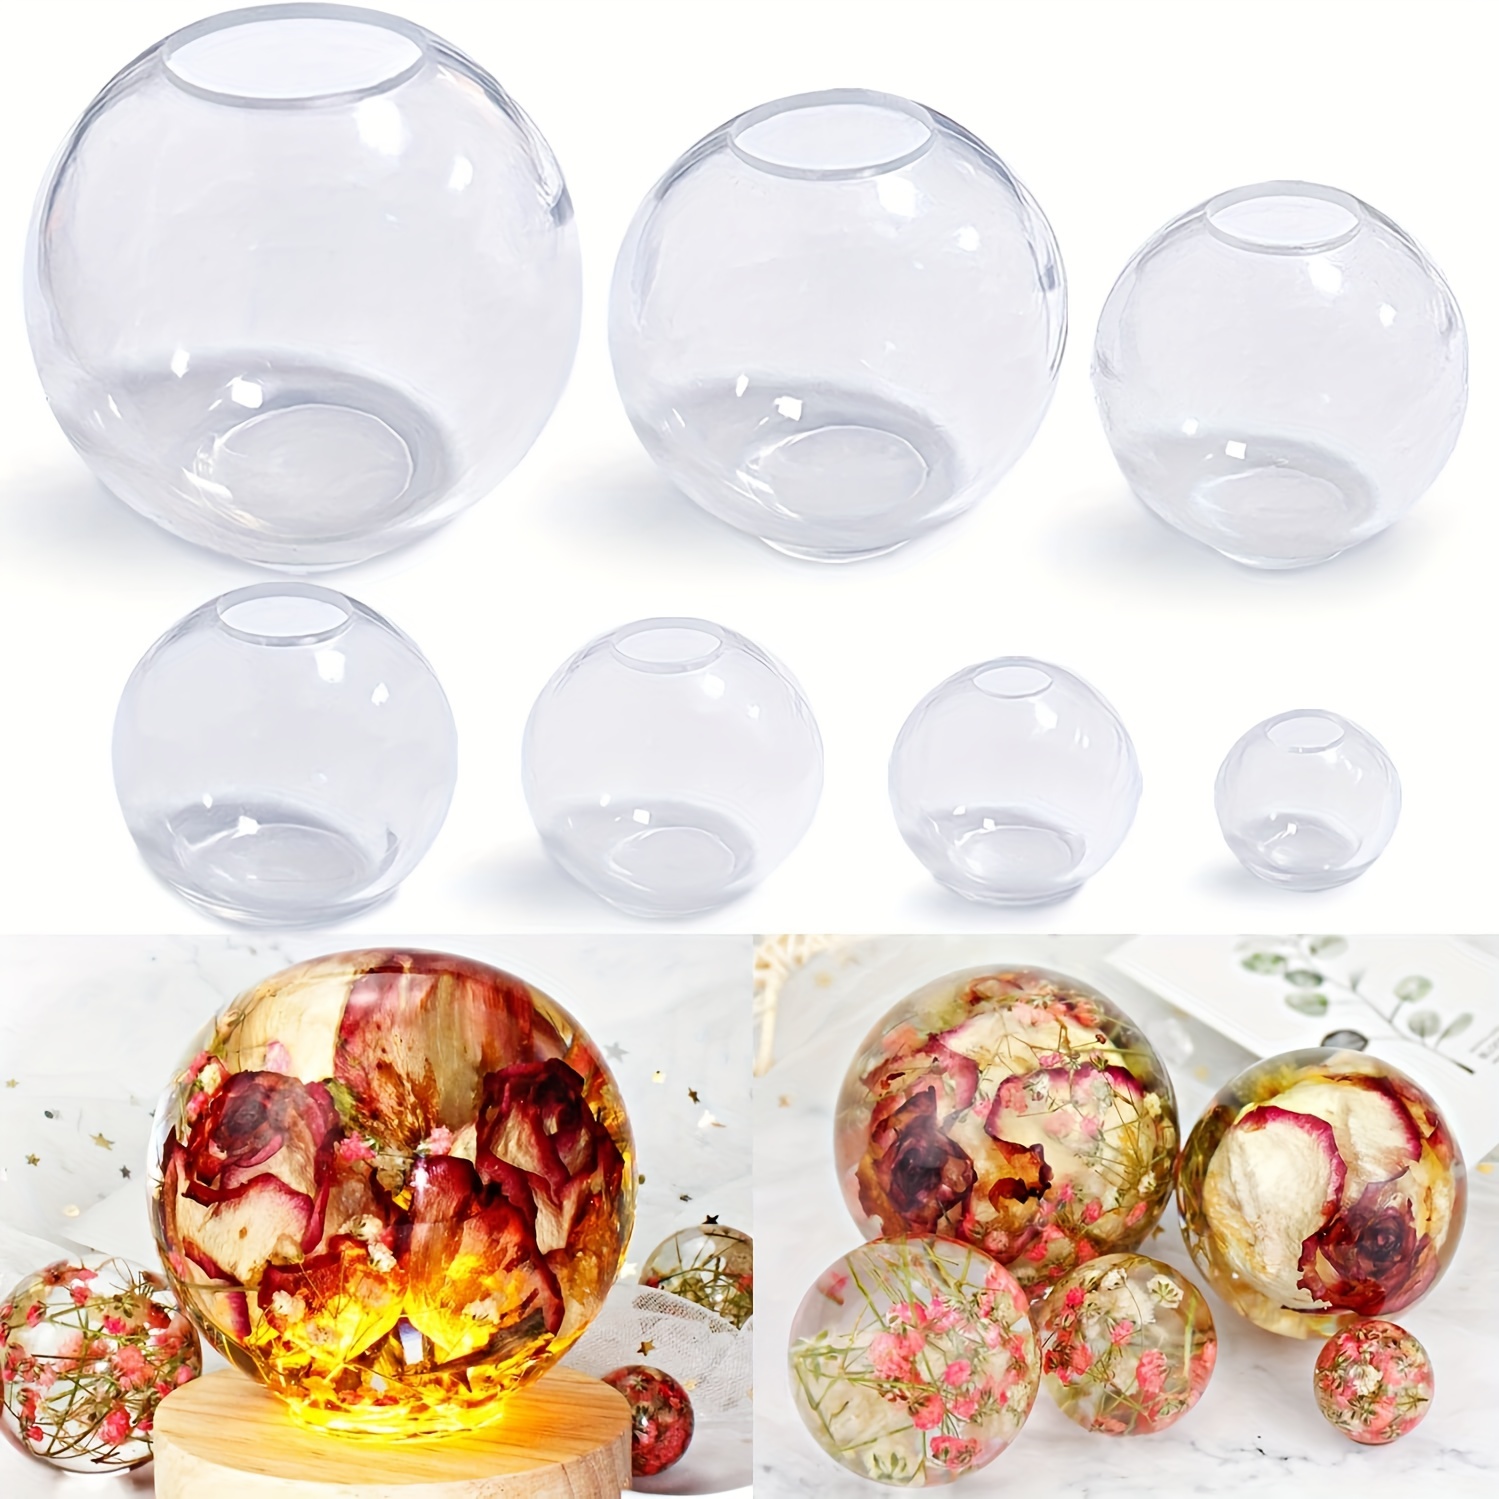 

Clear Silicone Sphere Molds, 4pcs/set Of 2", 1.7", 1.3", 0.9" 3d Seamless Sphere Silicone Molds For Resin Casting, Round Ball Orbs Epoxy Resin Mold For Jewelry, Soap, Candle Making Home Decor